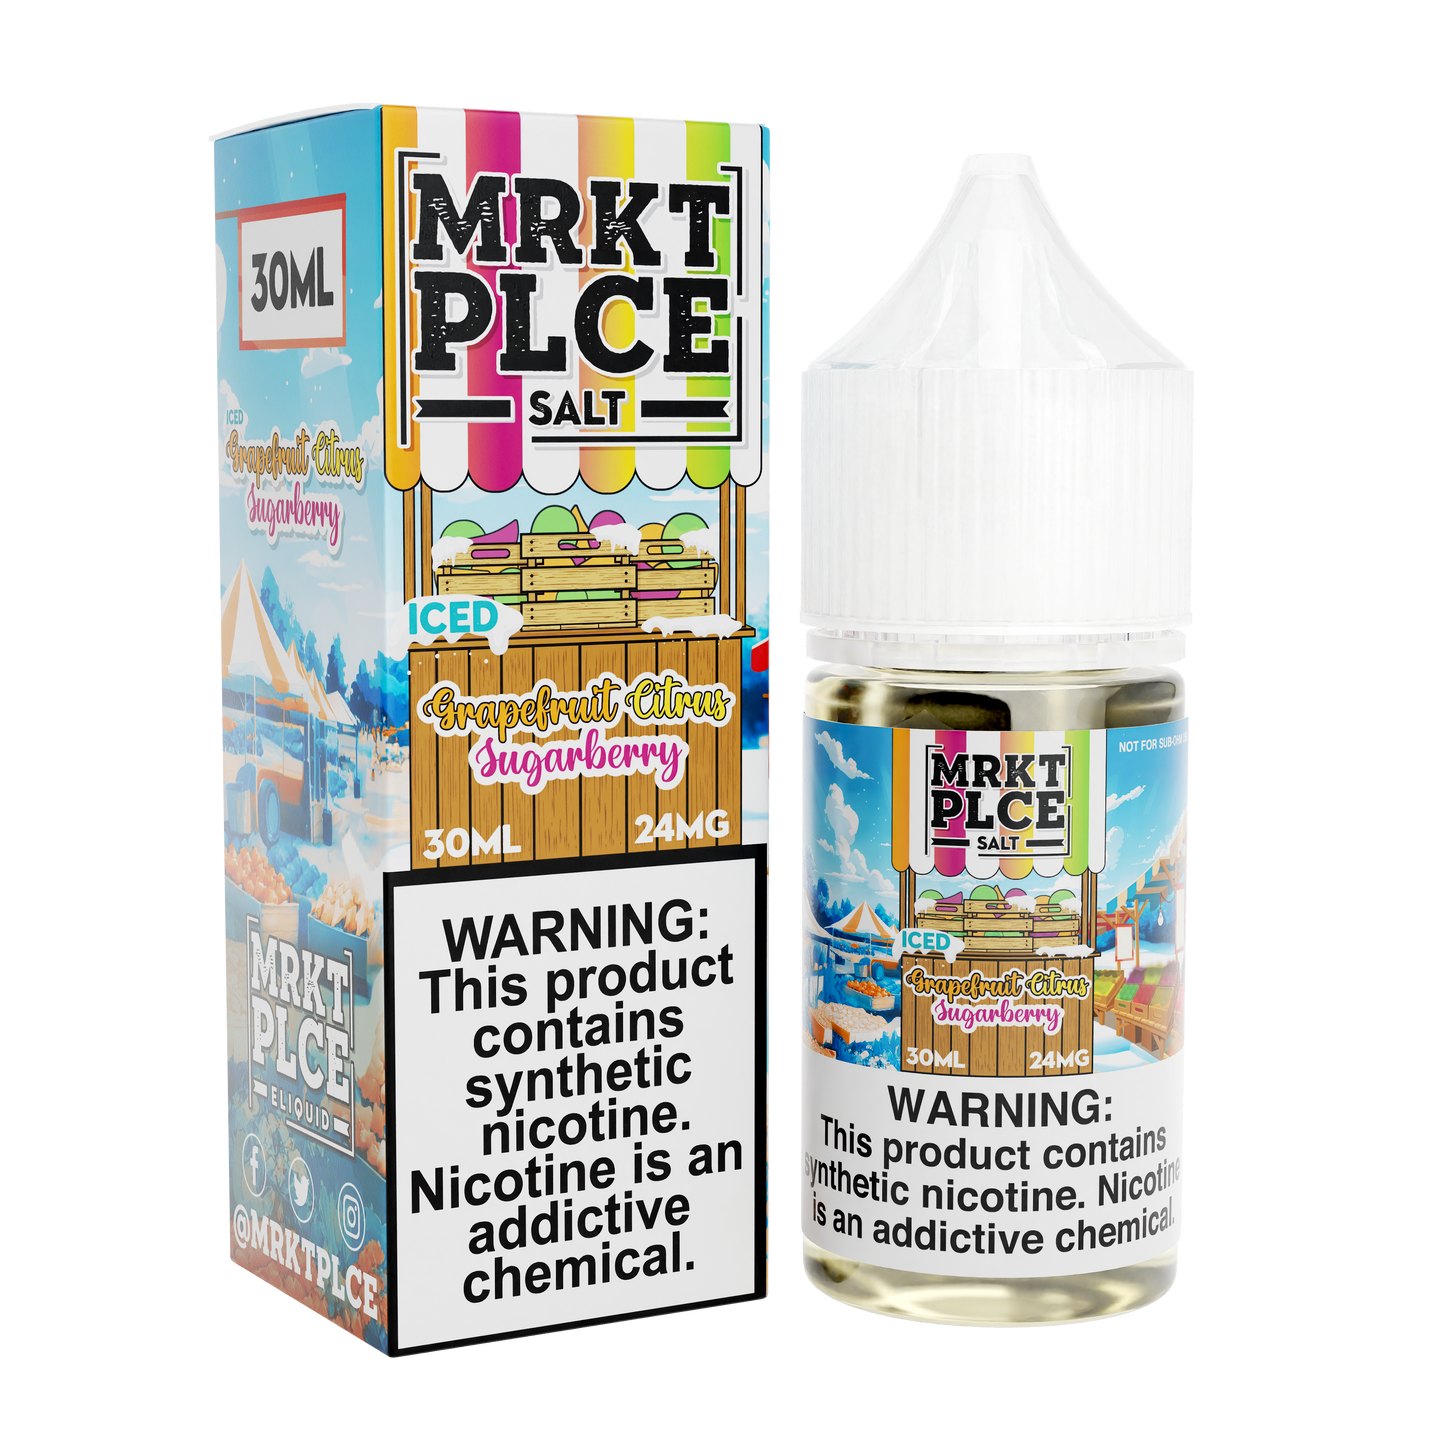 Iced Grapefruit Citrus Sugarberry by MRKT PLCE Salts 30mL with Packaging